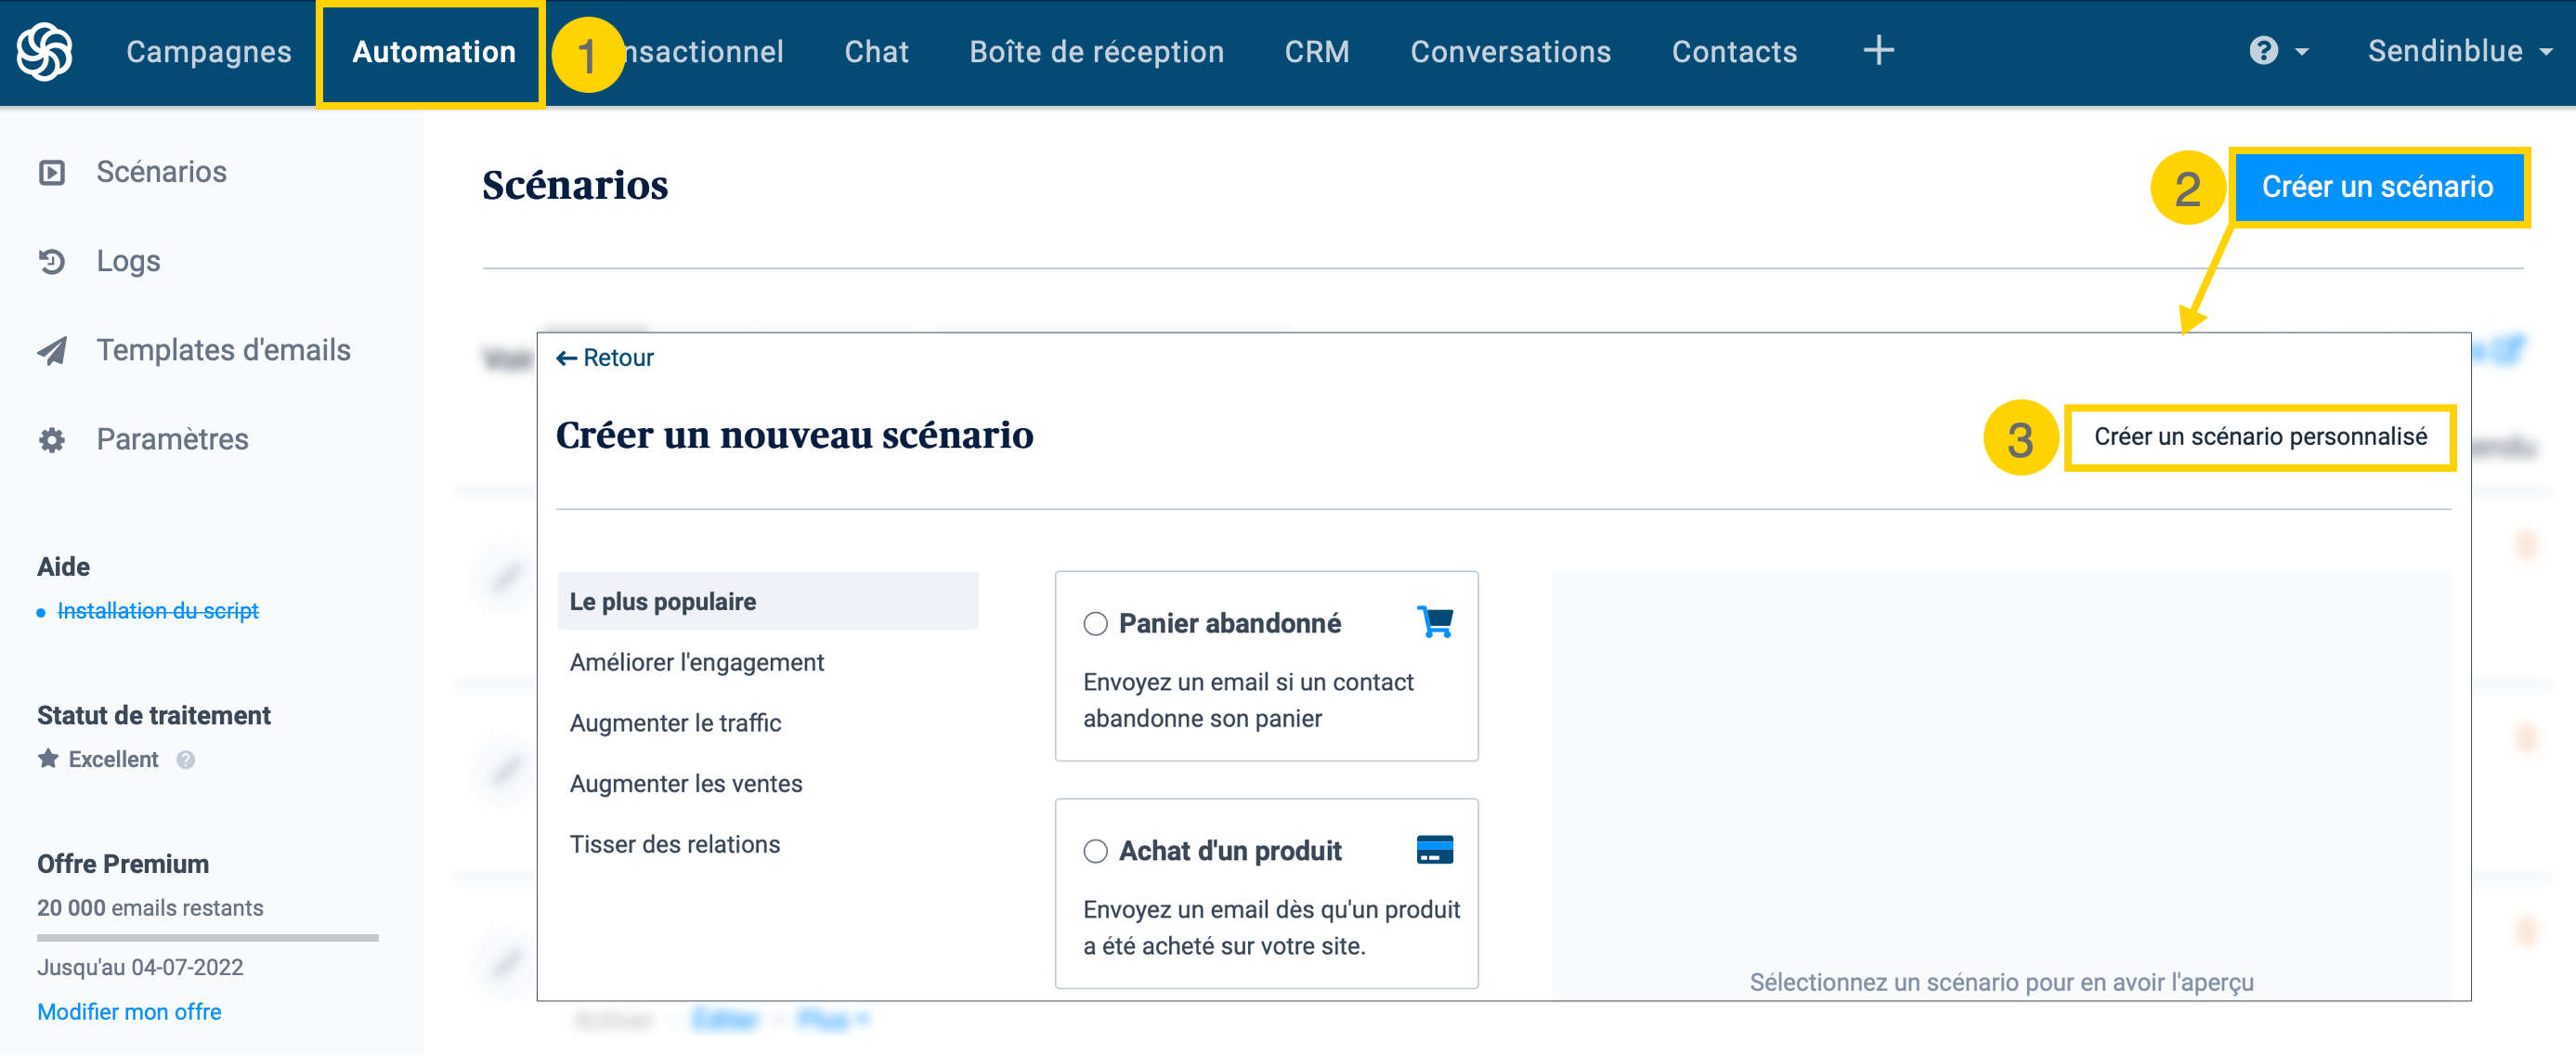 automation_create-custom-workflow_FR.png